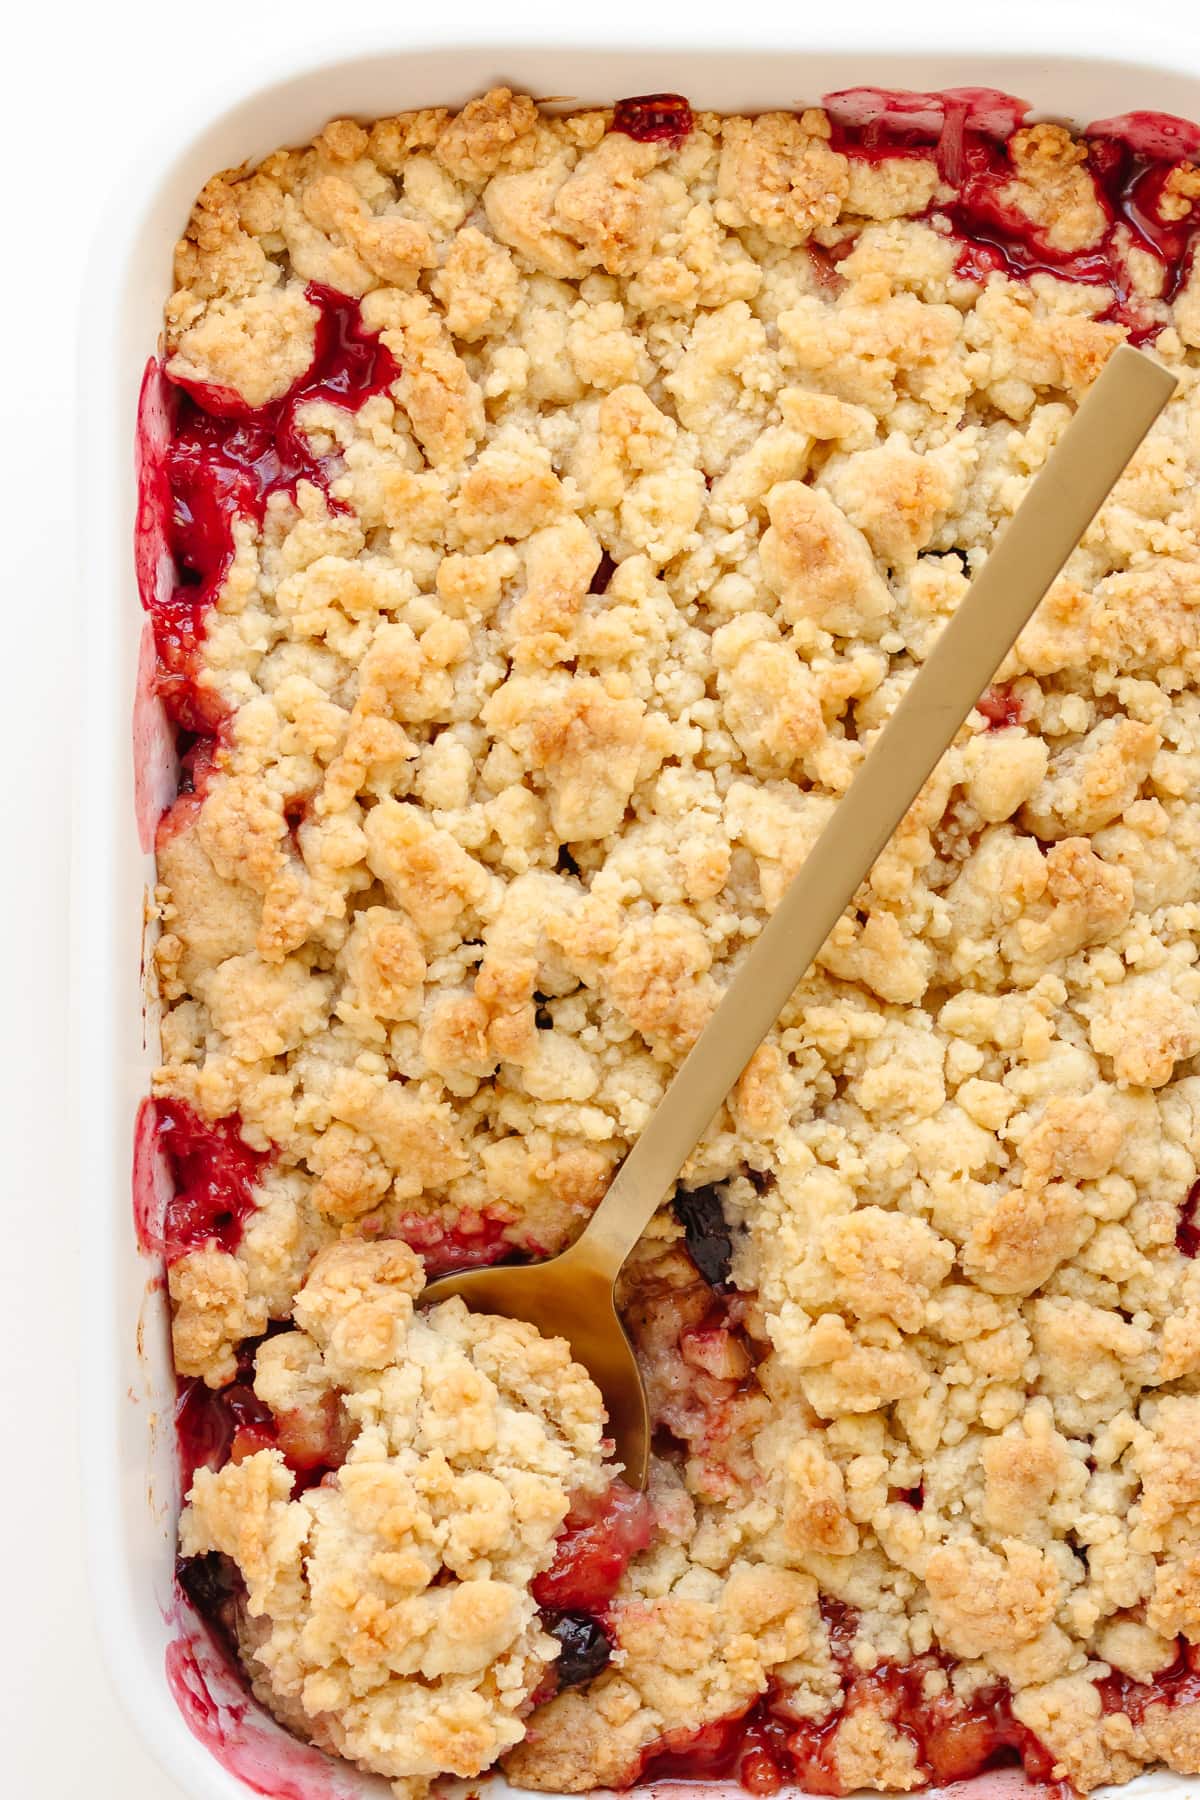 Apple and plum crumble in a white baking dish with gold colored serving spoon.